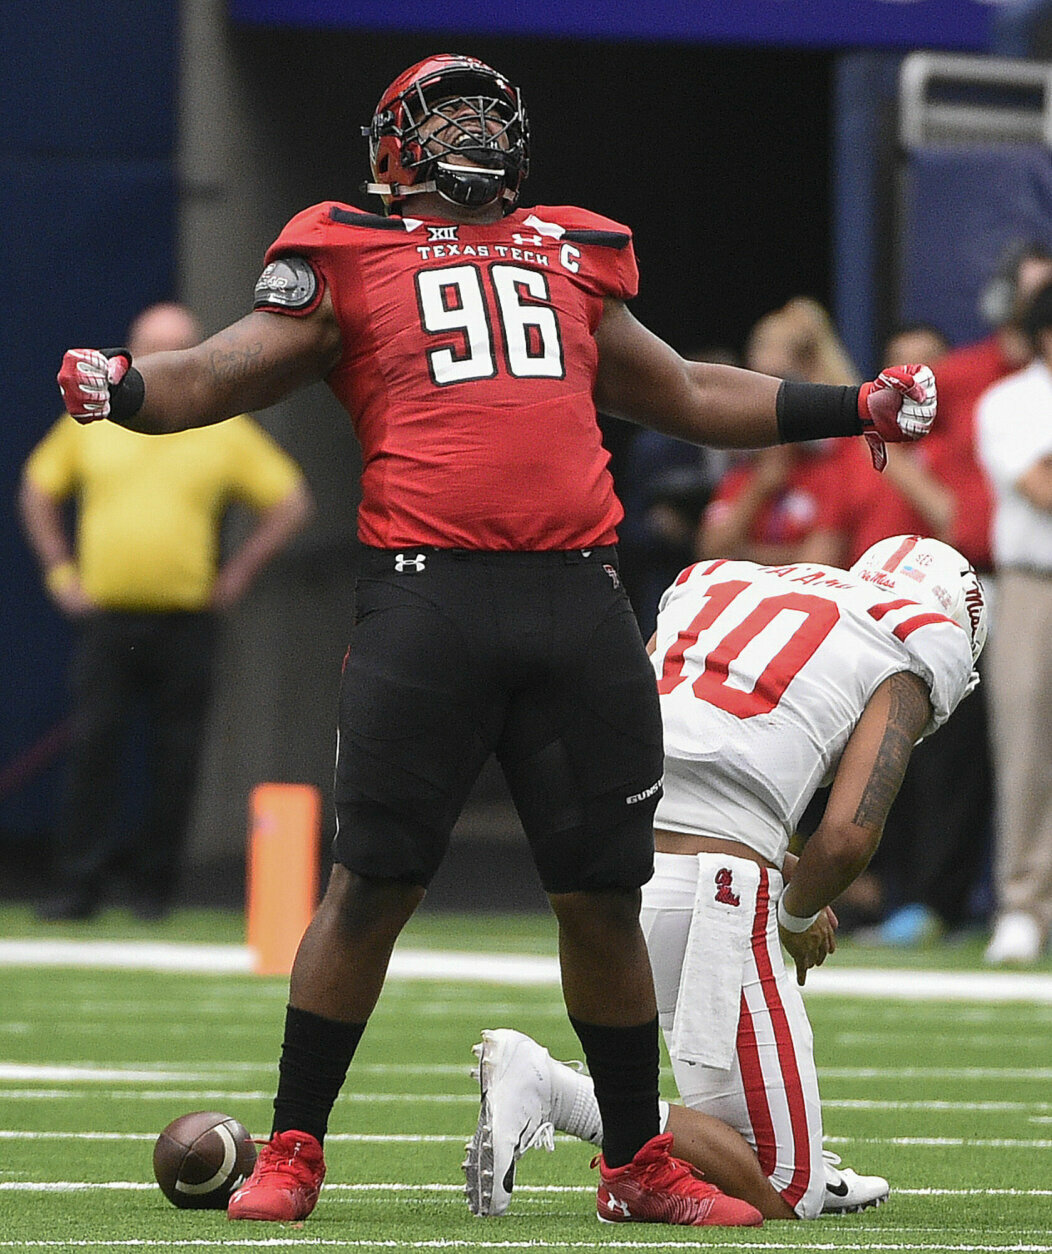 <p><strong>Round 5 pick (No. 170 overall): DL Broderick Washington, Texas Tech</strong></p>
<p>Texas Tech’s defense was bad last year, but Washington was one of the few bright spots. In fact, he was the first Red Raider <a href="https://www.dallasnews.com/sports/texas-tech-red-raiders/2020/04/25/texas-tech-defensive-tackle-broderick-washington-jr-selected-by-baltimore-ravens-with-170th-pick-in-nfl-draft/" target="_blank" rel="noopener">defensive lineman to be selected</a> to the Senior Bowl since 1999, and he led the unit this year with 39 tackles.</p>
<p>A three-year starter and two-time captain while in Lubbock, Washington was praised for his <a href="https://twitter.com/EricKellyTV/status/1254144607983730692?s=20" target="_blank" rel="noopener">preparation and work ethic</a> by his former defensive coordinator Keith Patterson. Washington is considered undersized at 305 pounds, but his intangibles and athleticism should put him in a position to backup Brandon Williams at the team’s zero technique lineman.</p>
